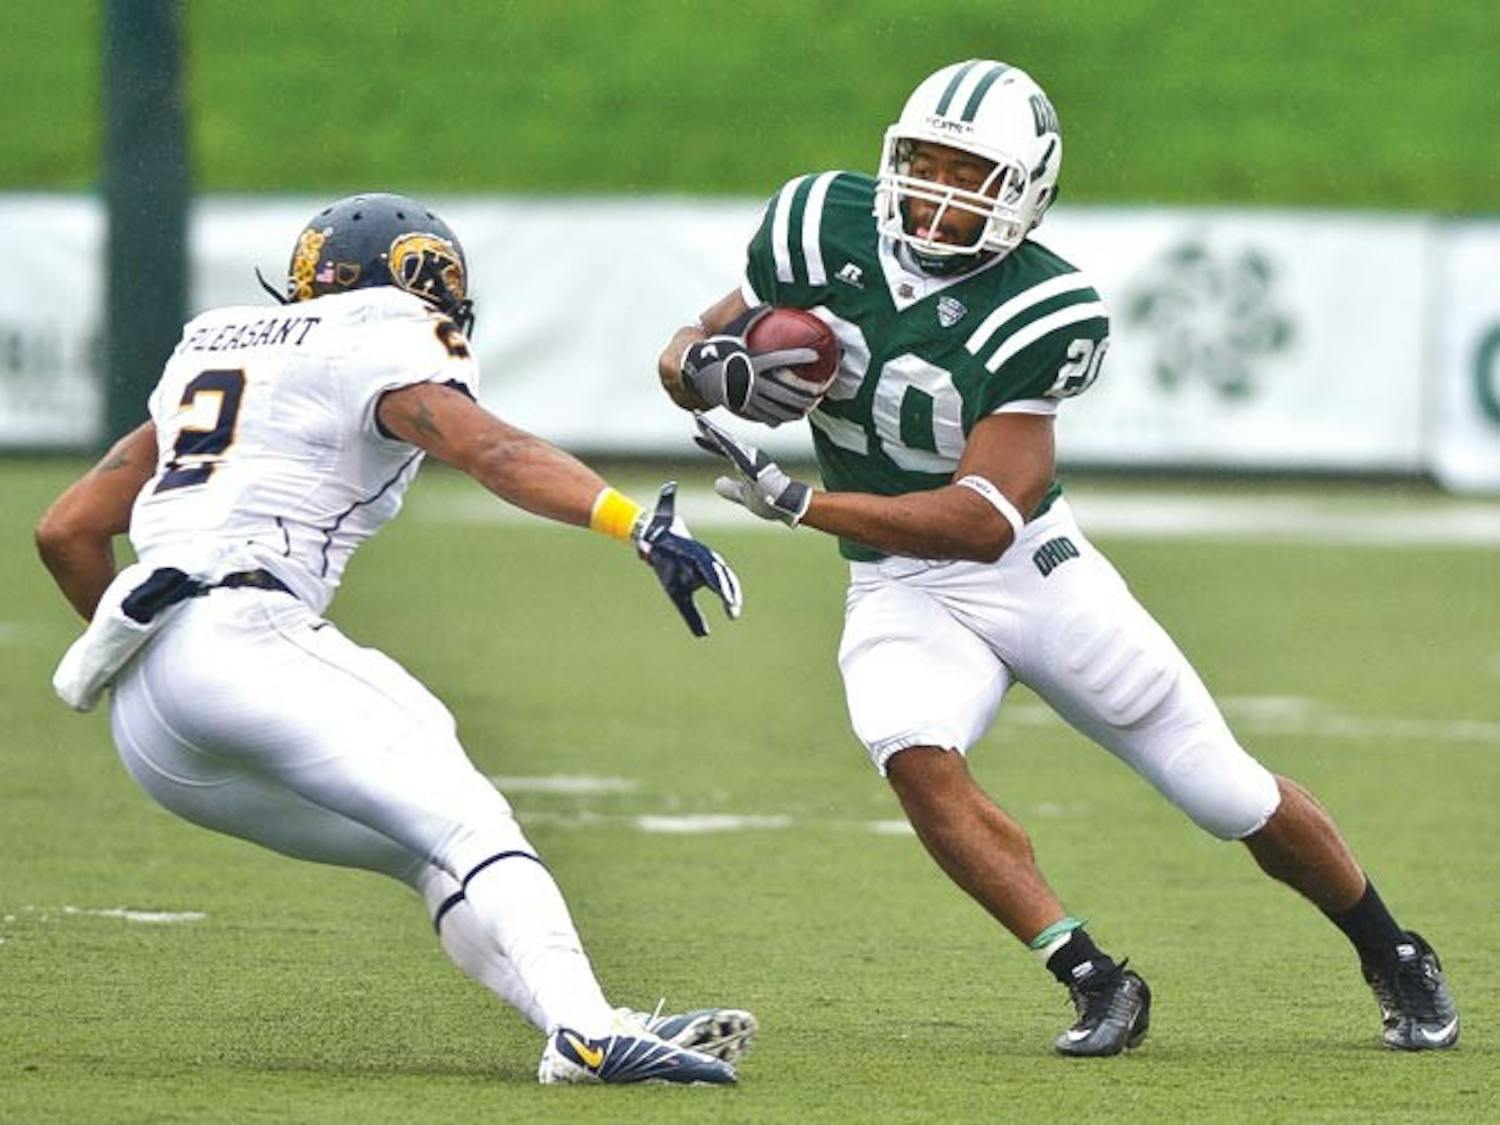 Football: Battle for Ohio's lead rusher yields no clear favorite  